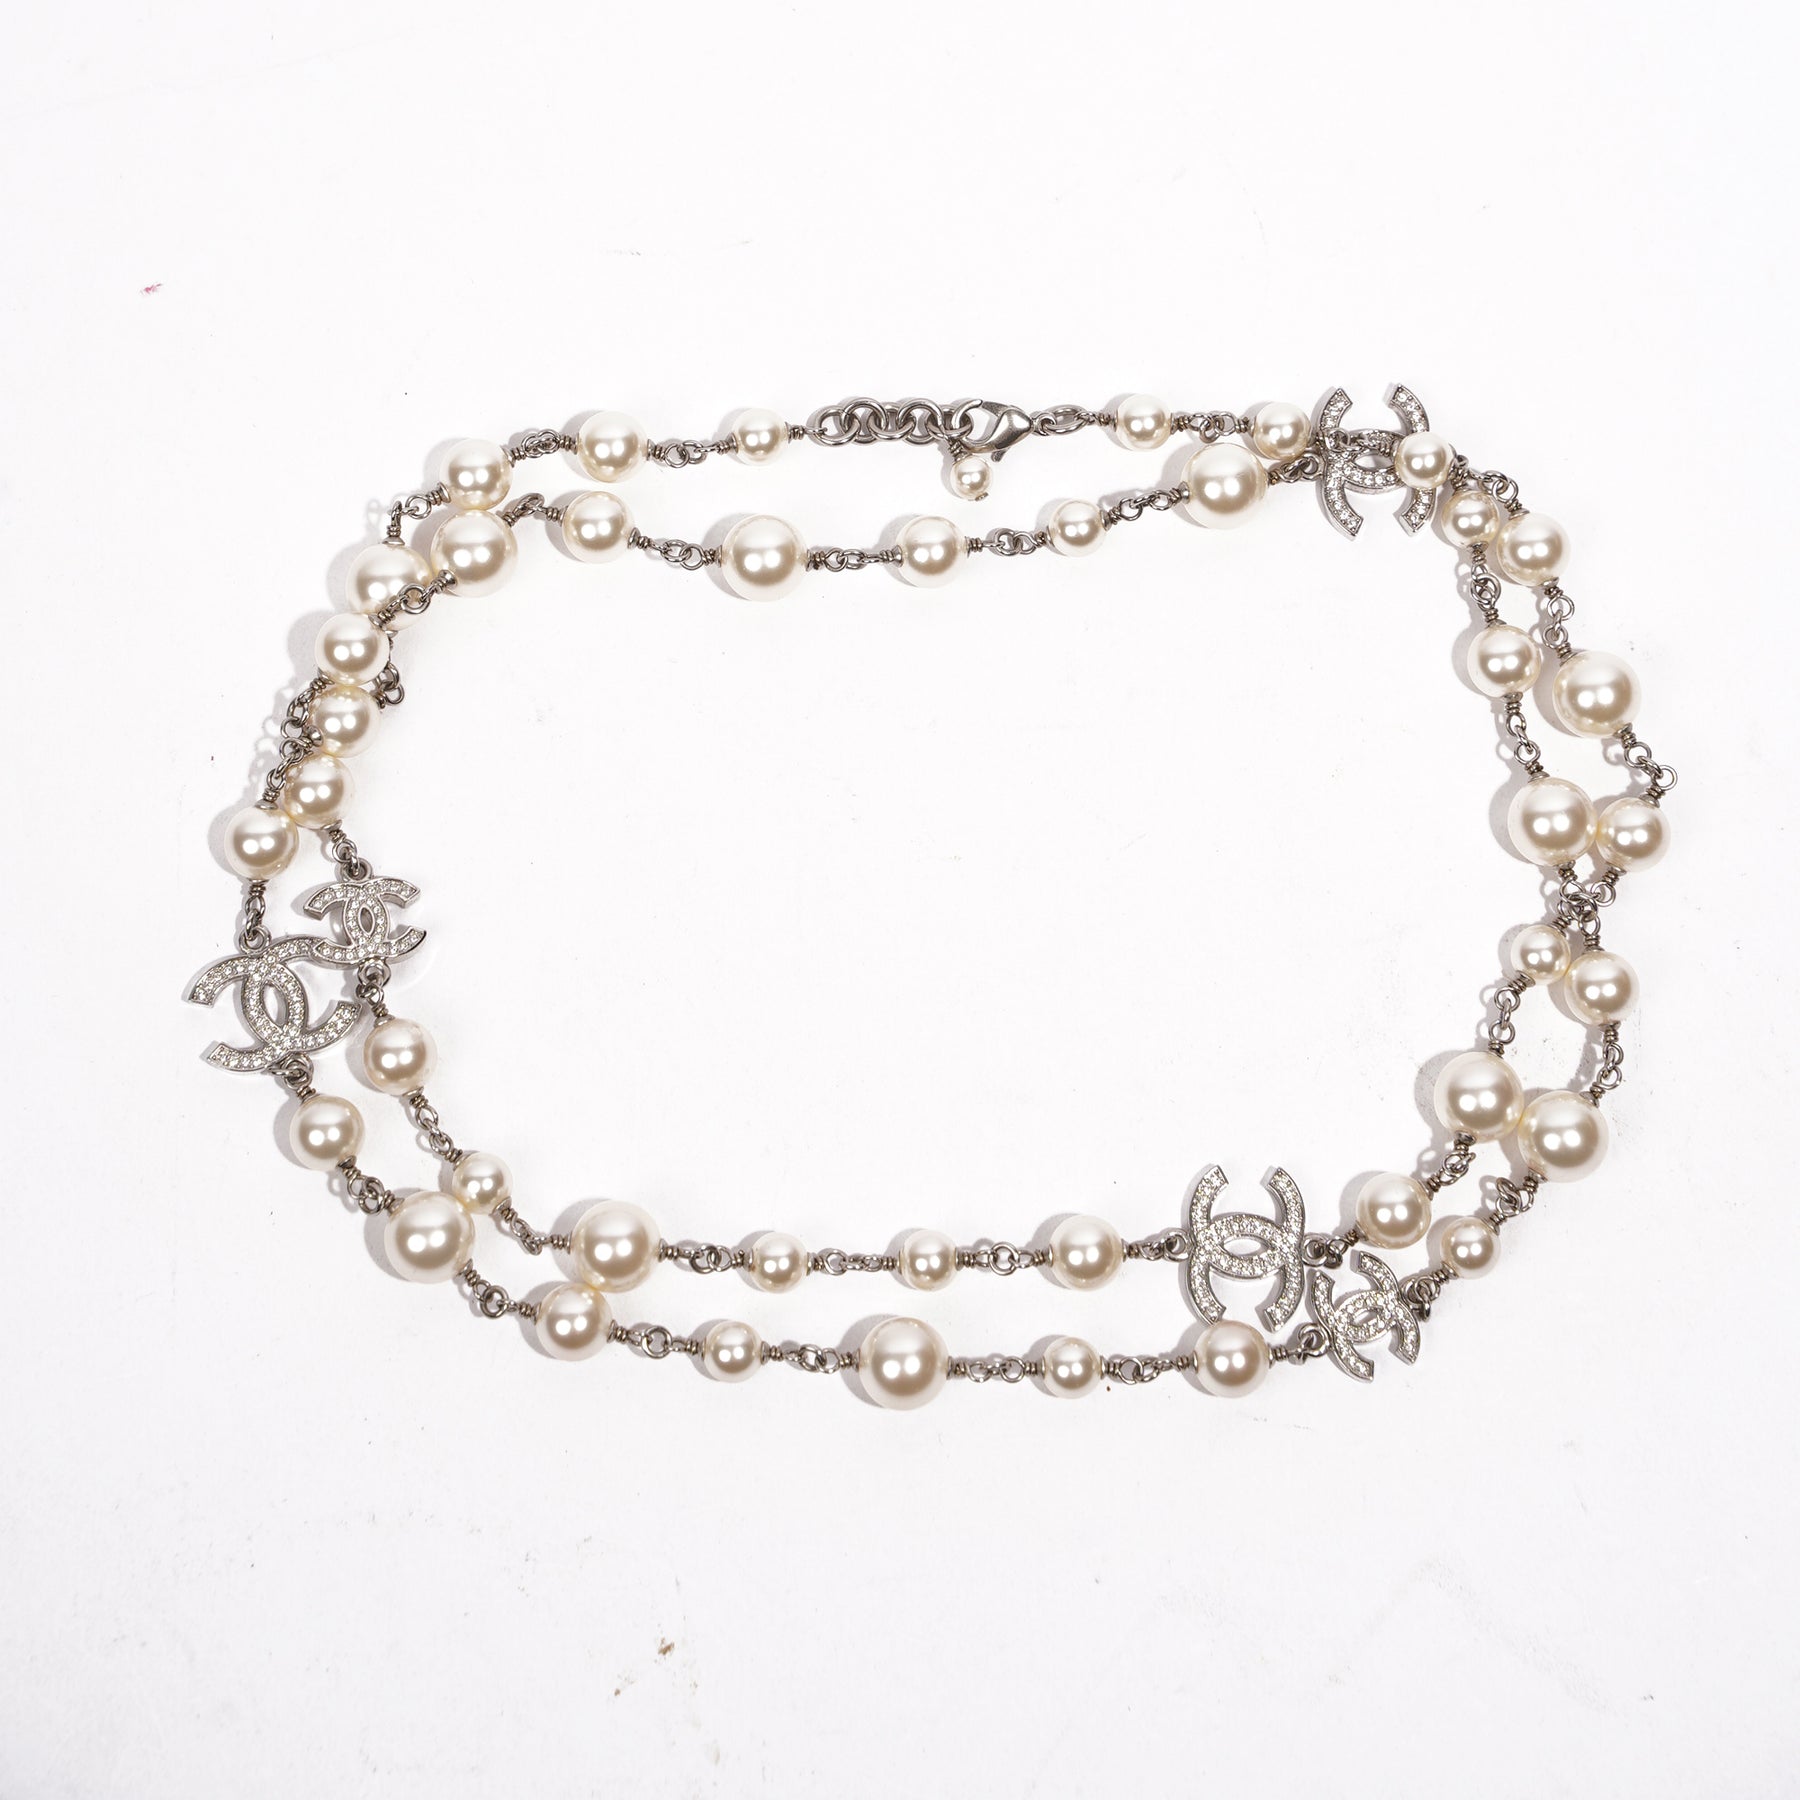 chanel reworked necklace